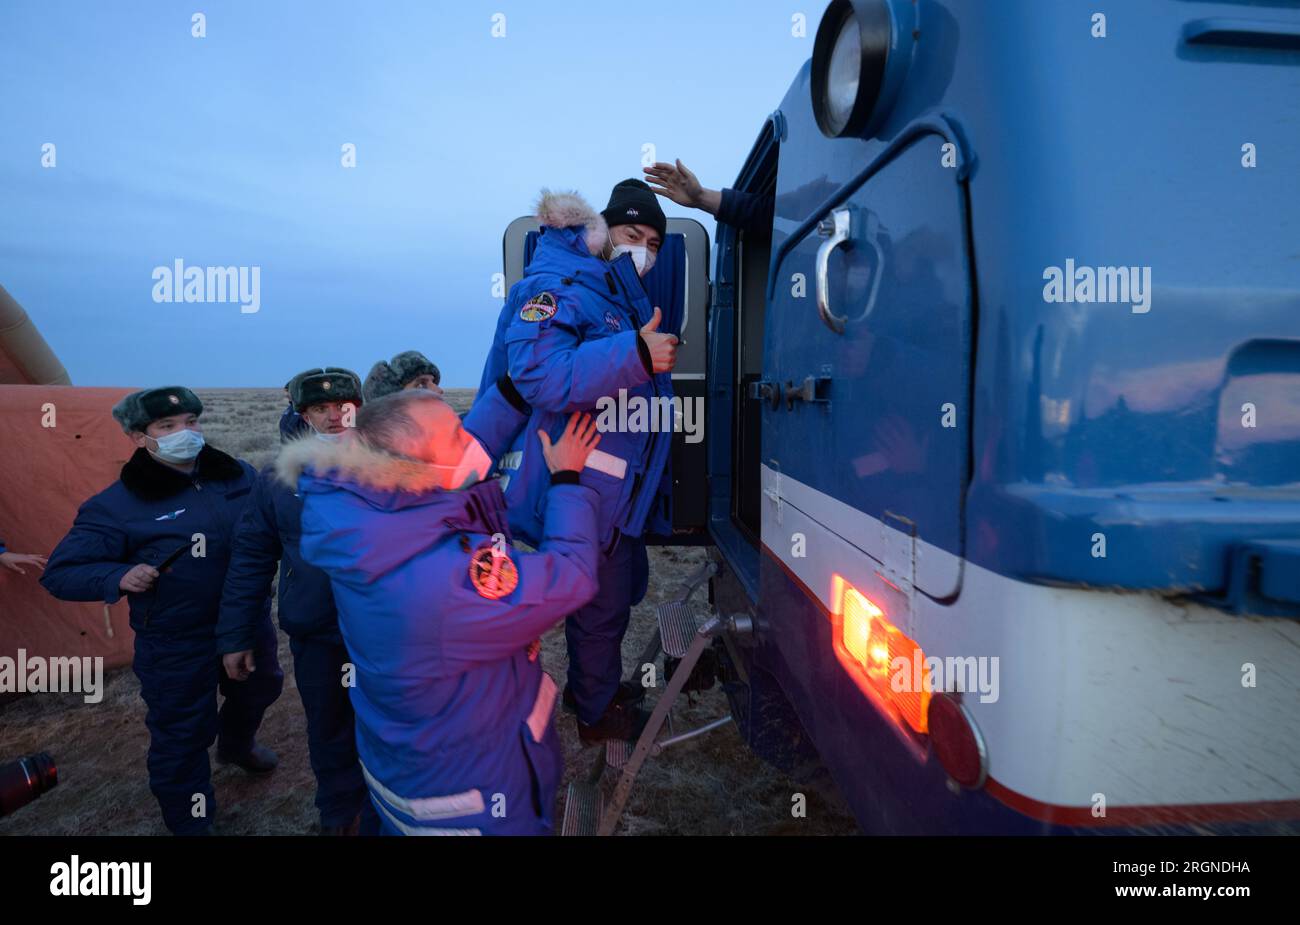 Reportage: Expedition 66 Soyuz Landing (March 2022) - Expedition 66 NASA astronaut Mark Vande Hei gives a thumbs up as he is helped aboard a Russian all terrain vehicle by NASA Astronaut Office Representative, astronaut Drew Feustel, that will take him to an awaiting helicopter. Stock Photo